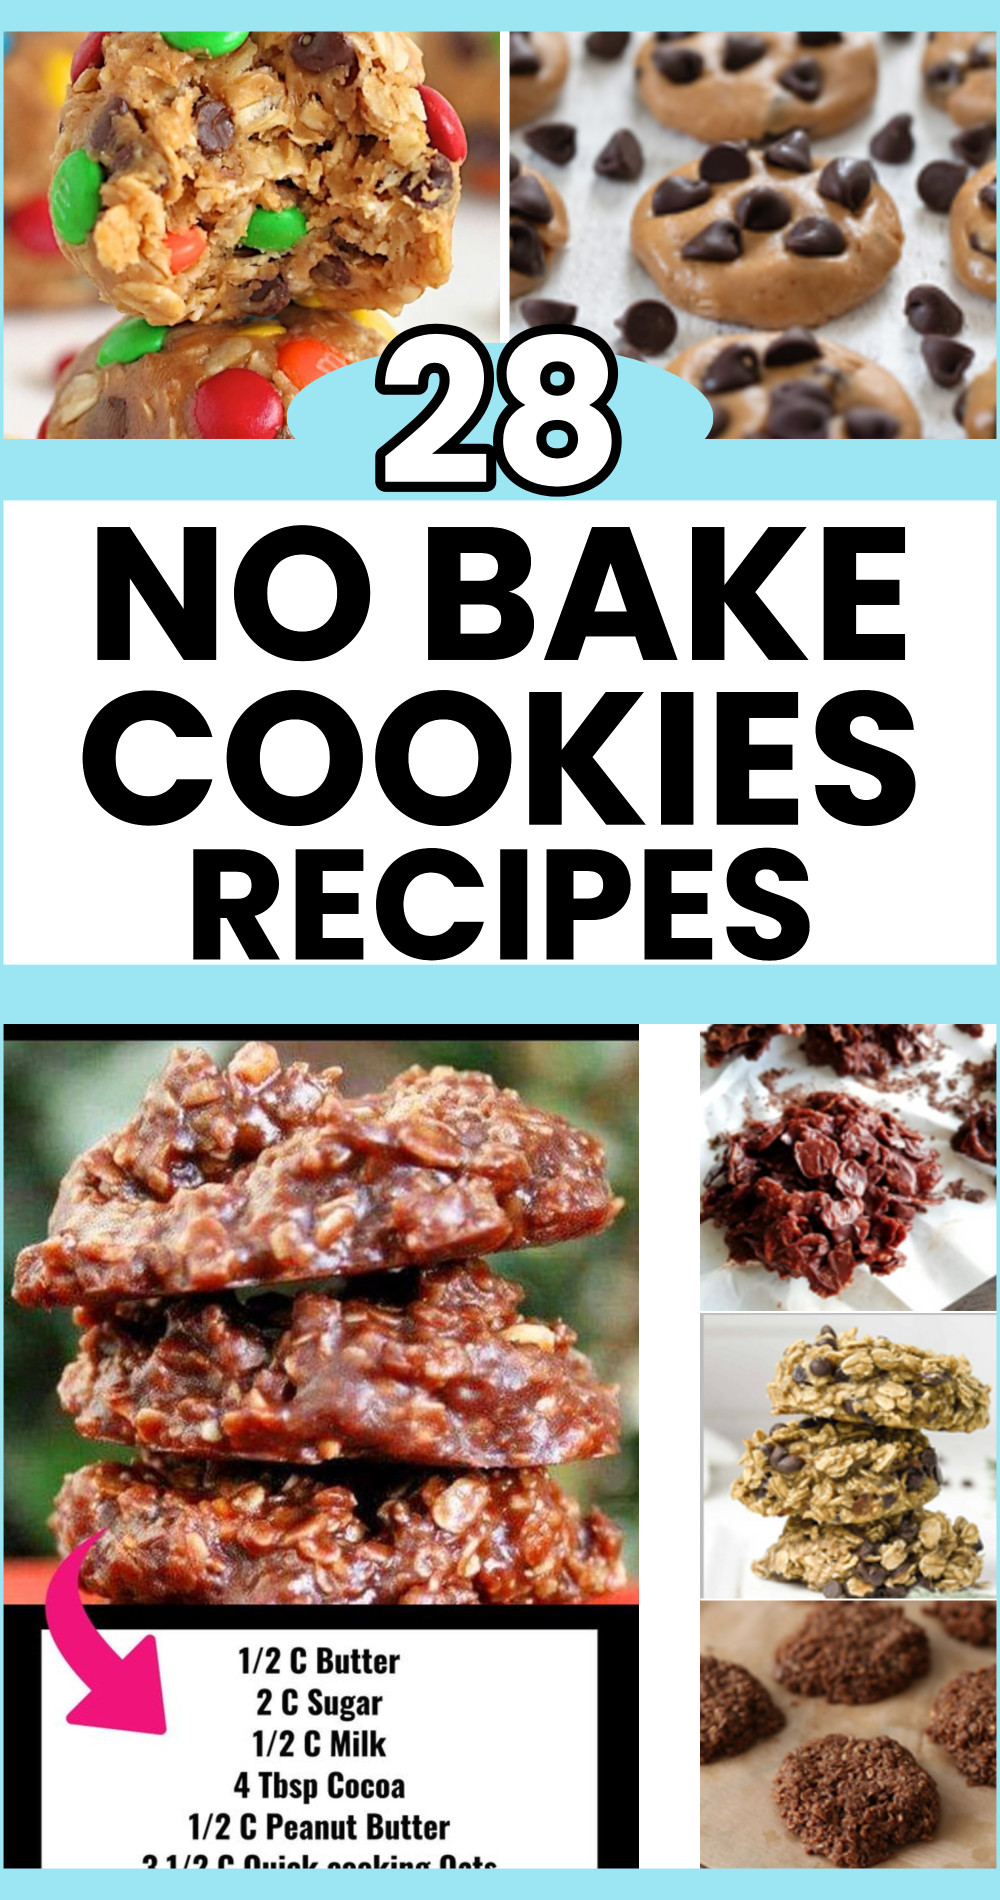 No Bake Cookies - 28 no bake cookie recipes and variations to try.